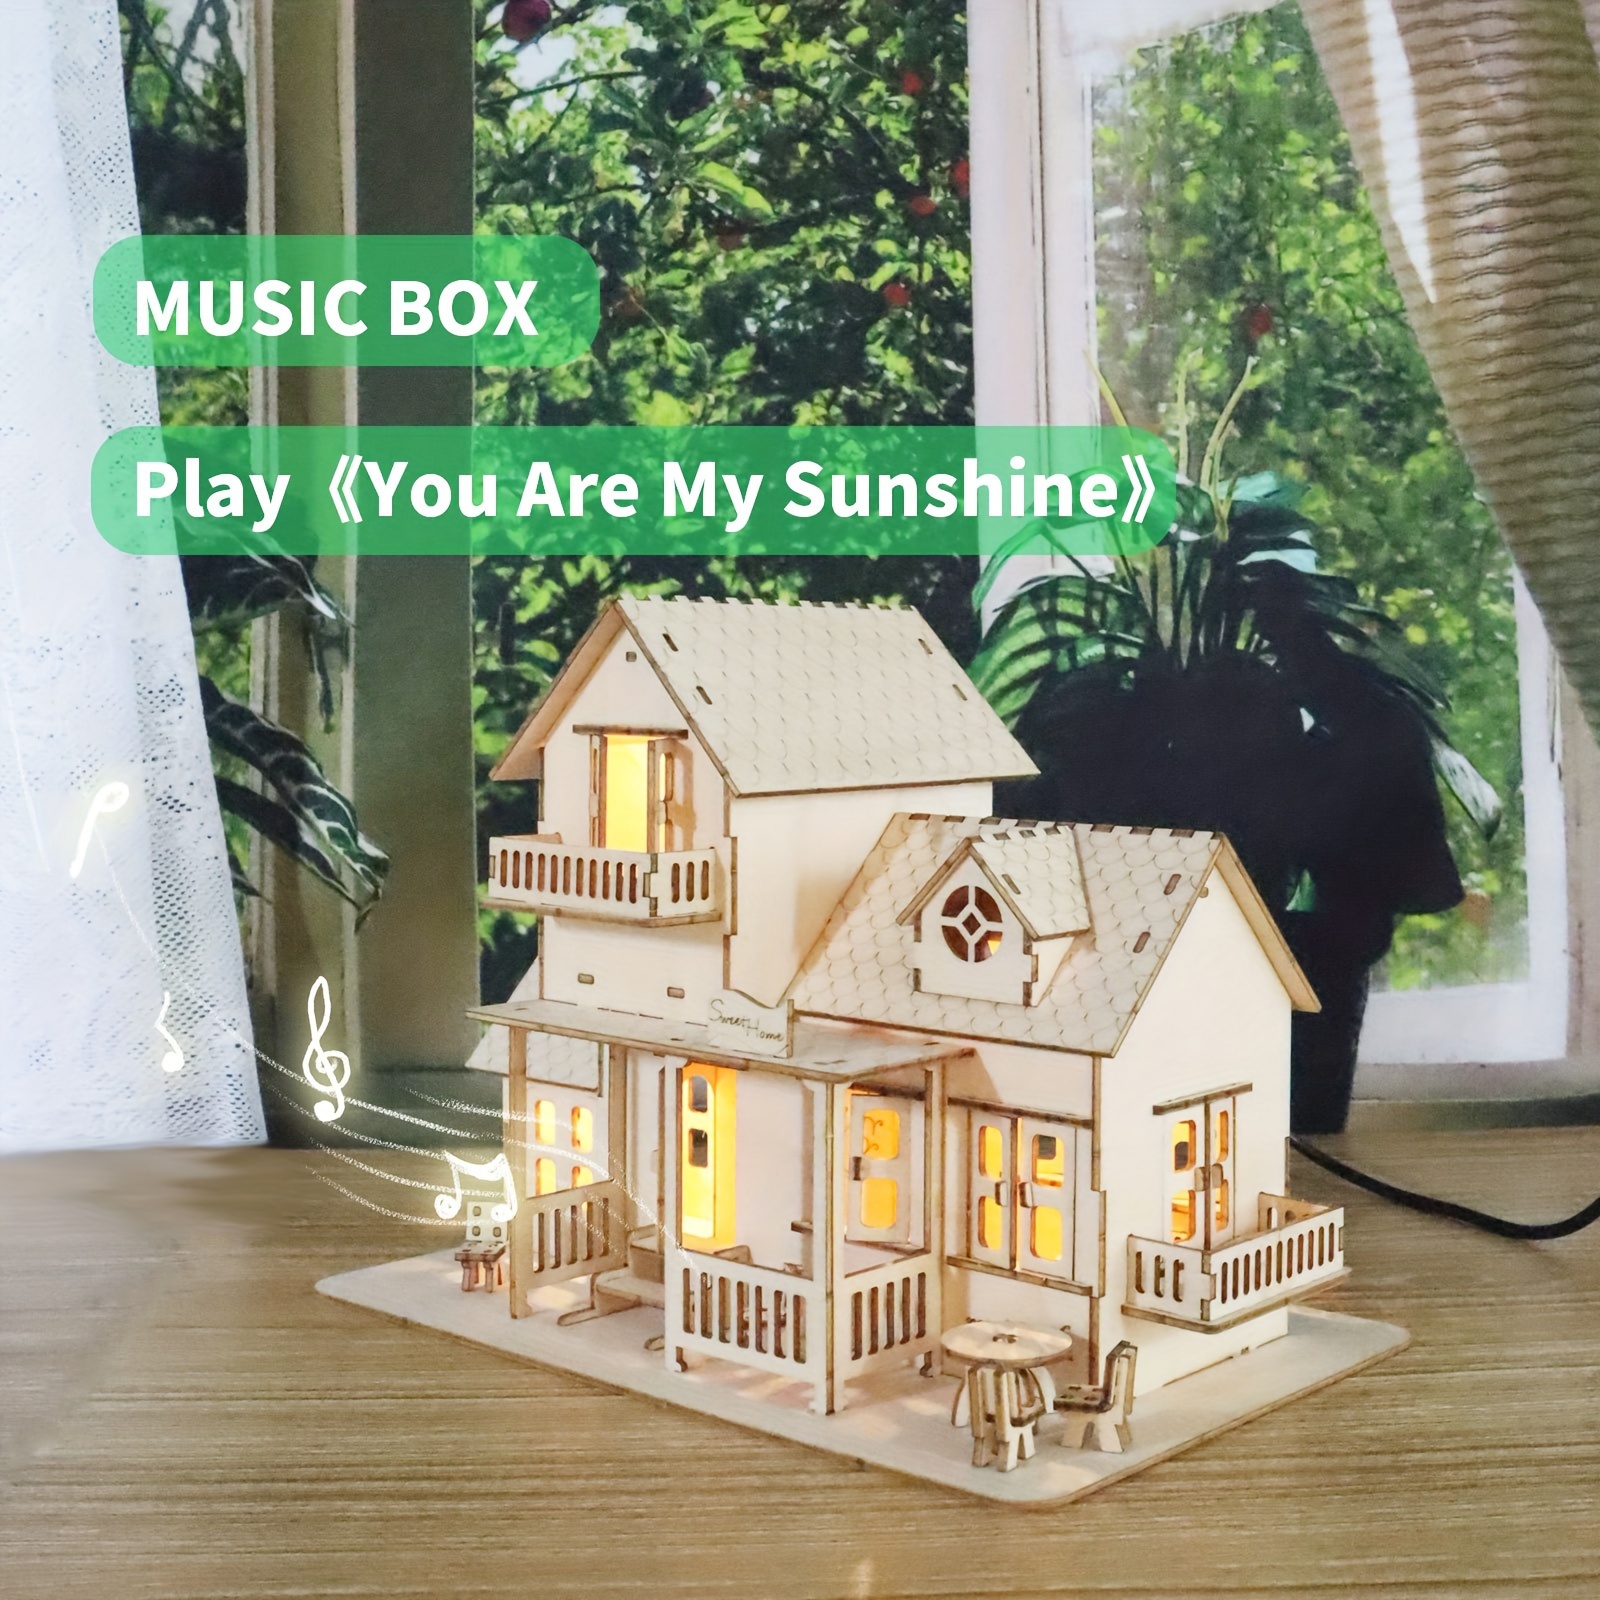 

3d Wooden Puzzle Sweet Home Music Box Craft Model Dollhouse Kits Diy House Building With Led Night Lights Gifts For Christmas